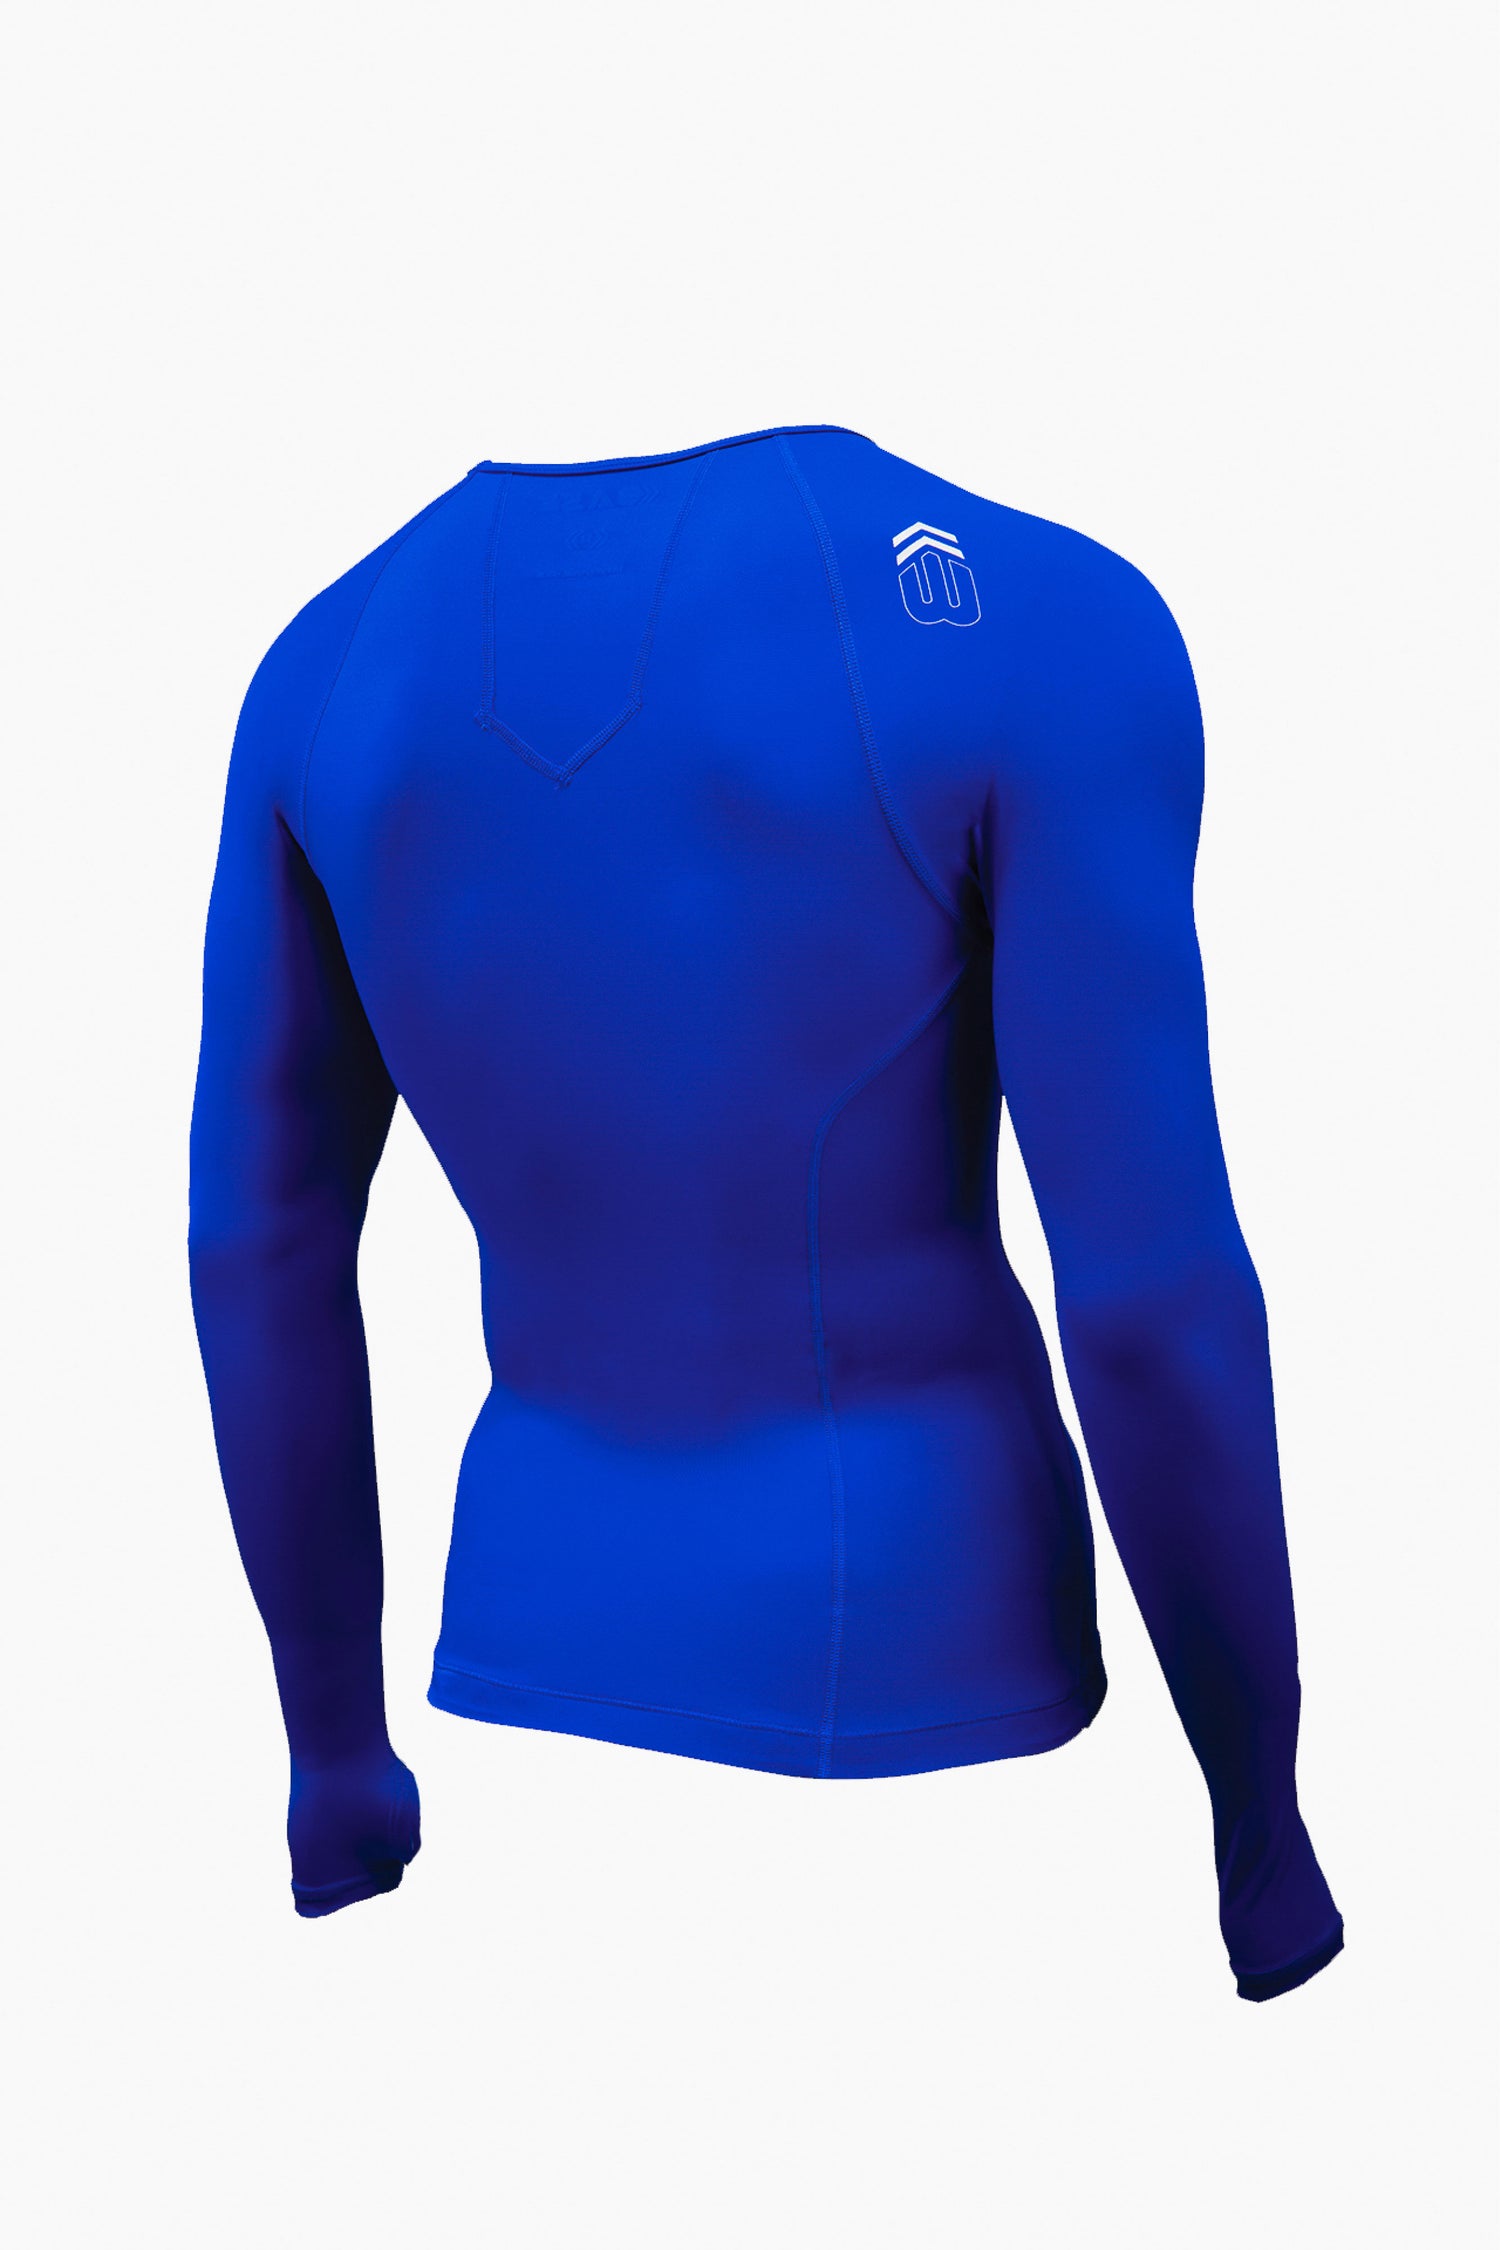 Mens Ultra Soft Thermal Shirt - Compression Baselayer Crew Neck Top -  Fleece Lined Long Sleeve Underwear , Navy Blue, XL 